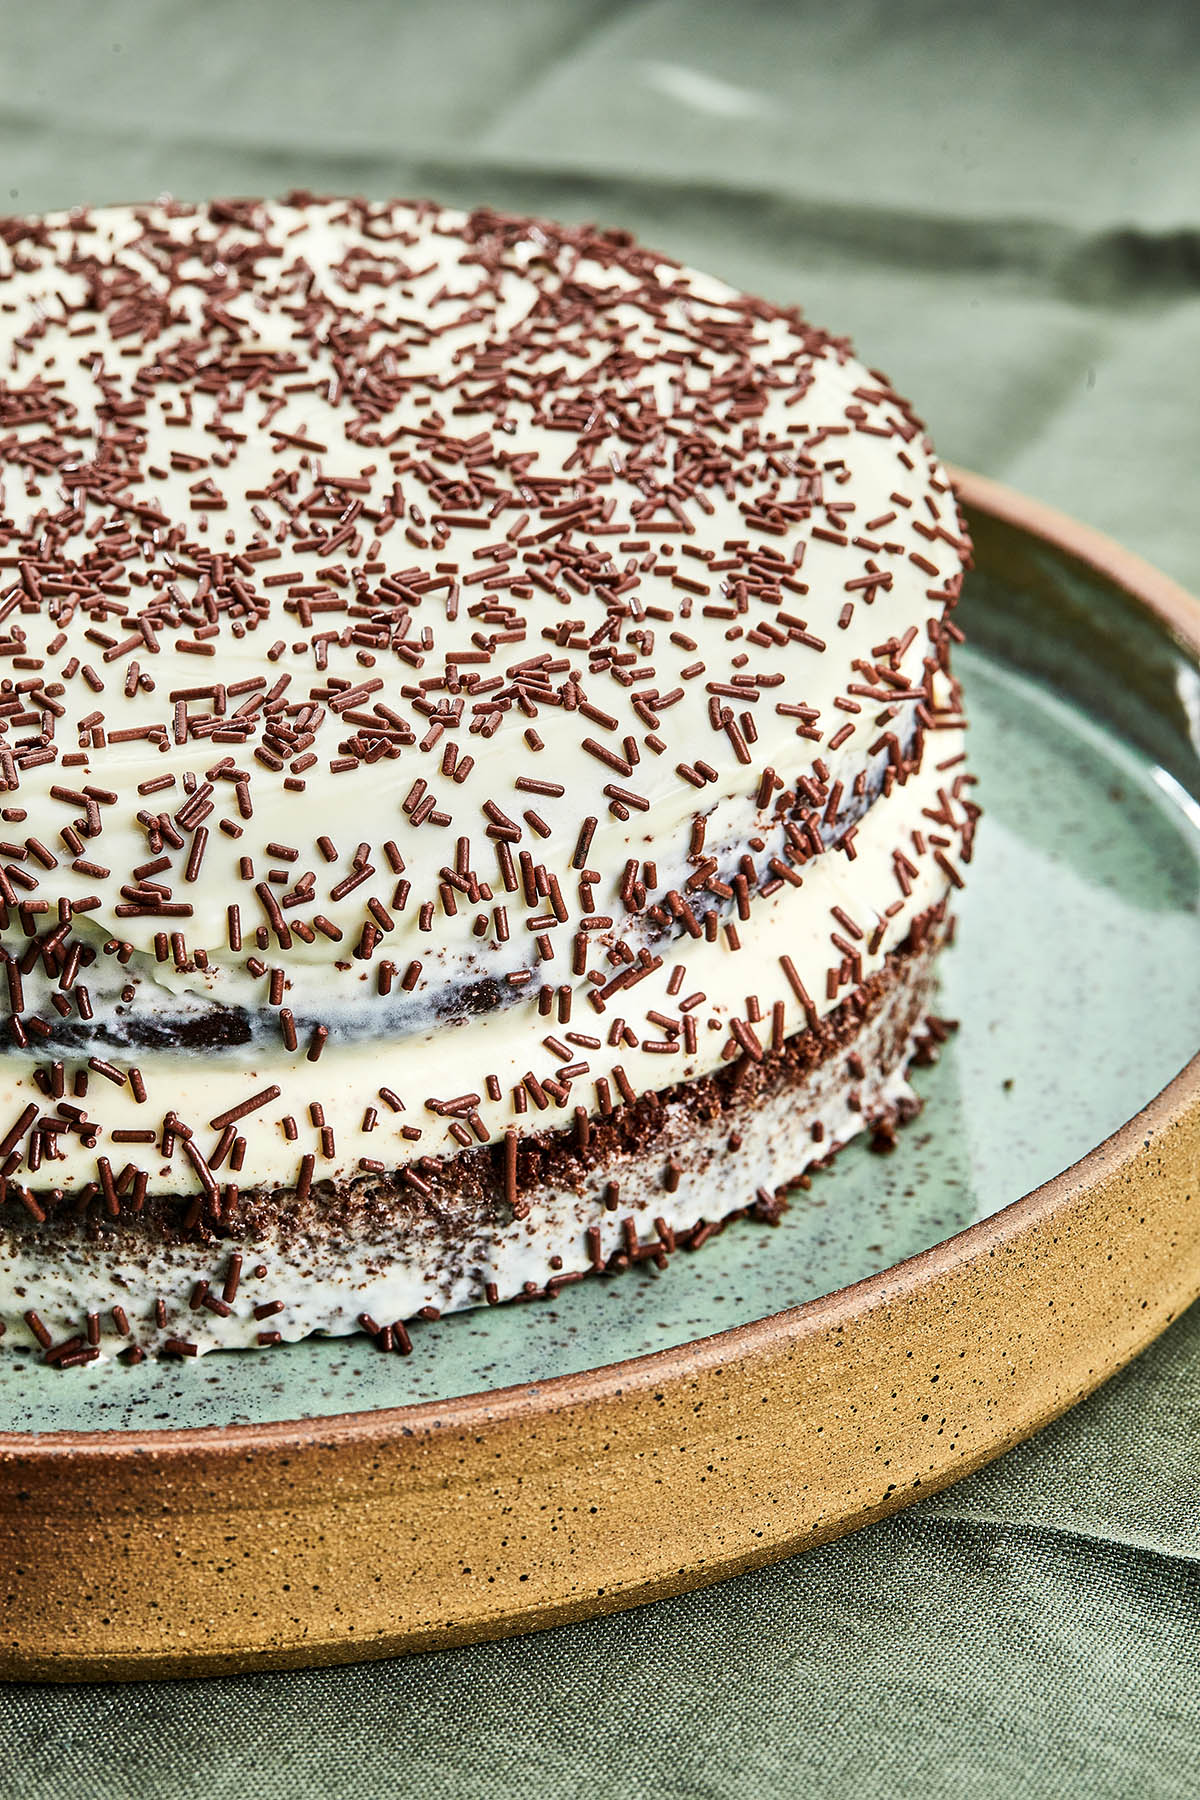 Close up of a whole wheat chocolate cake, unsliced, with icing and chocolate sprinkles.